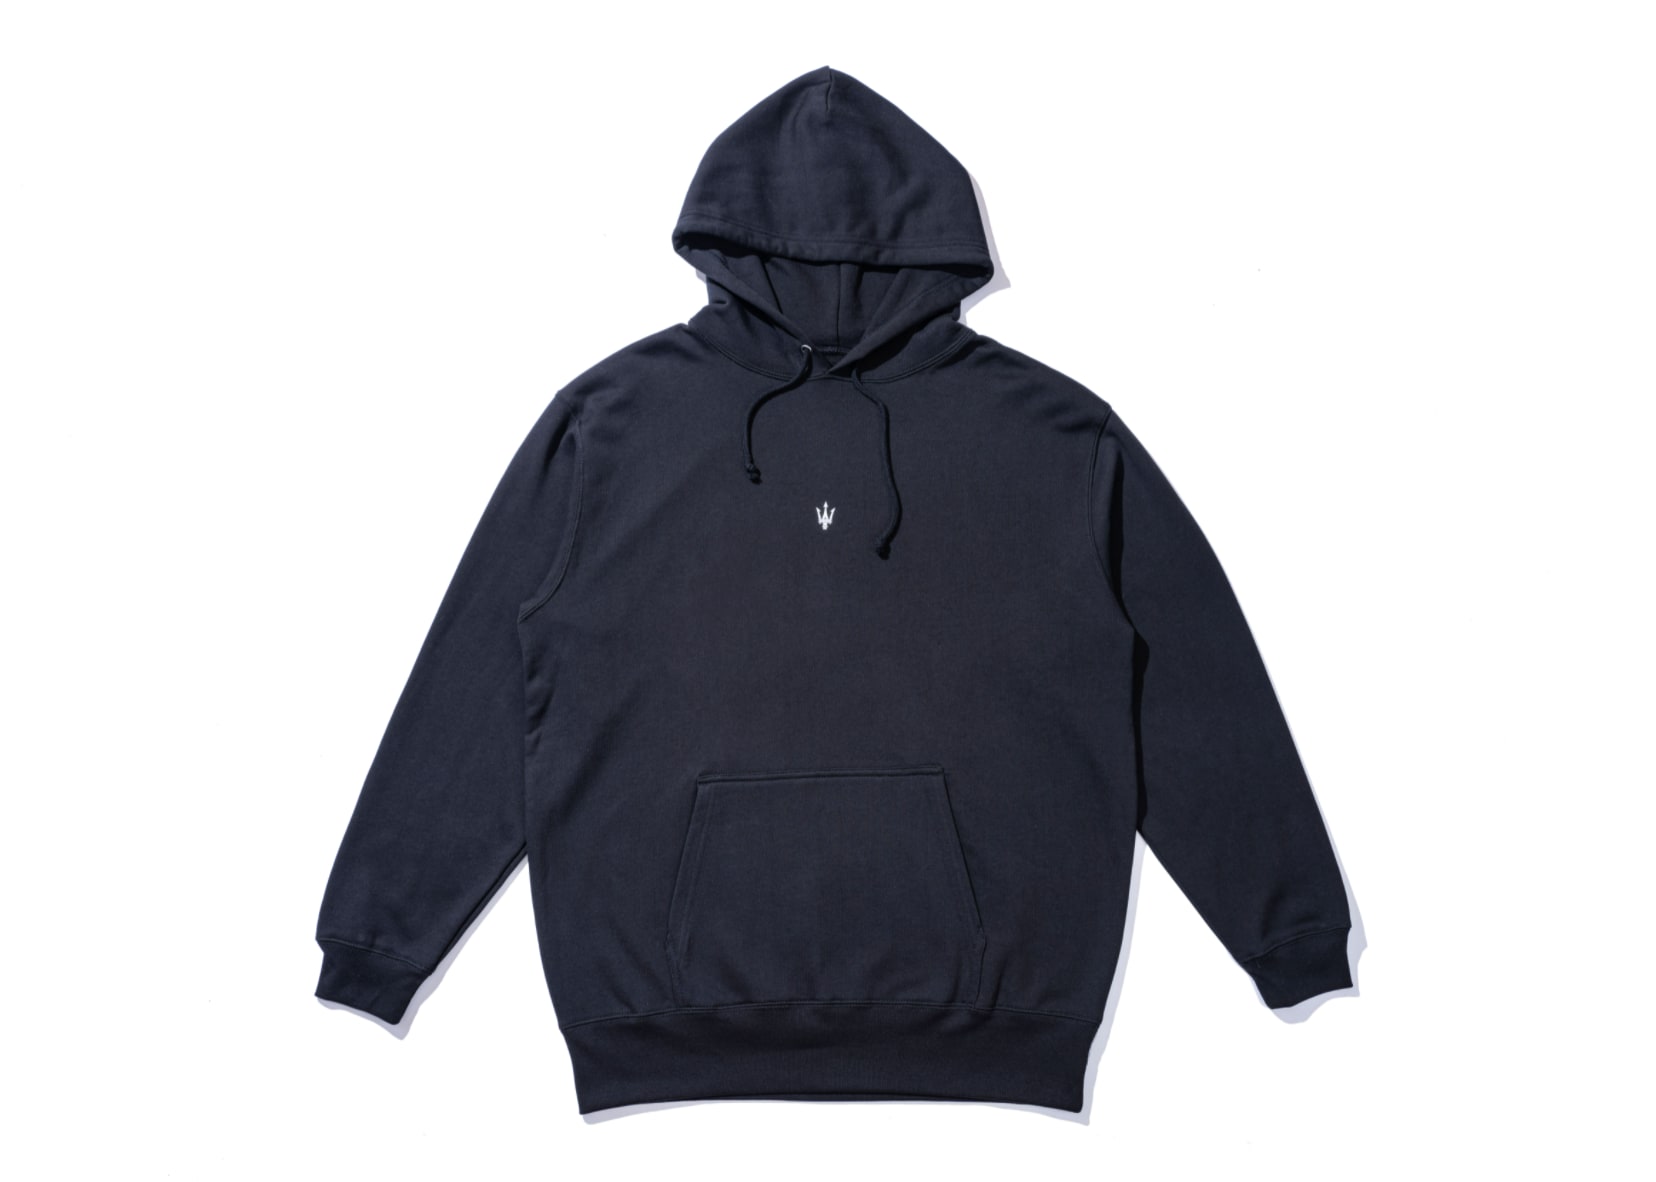 A Fragment hoodie is shown.